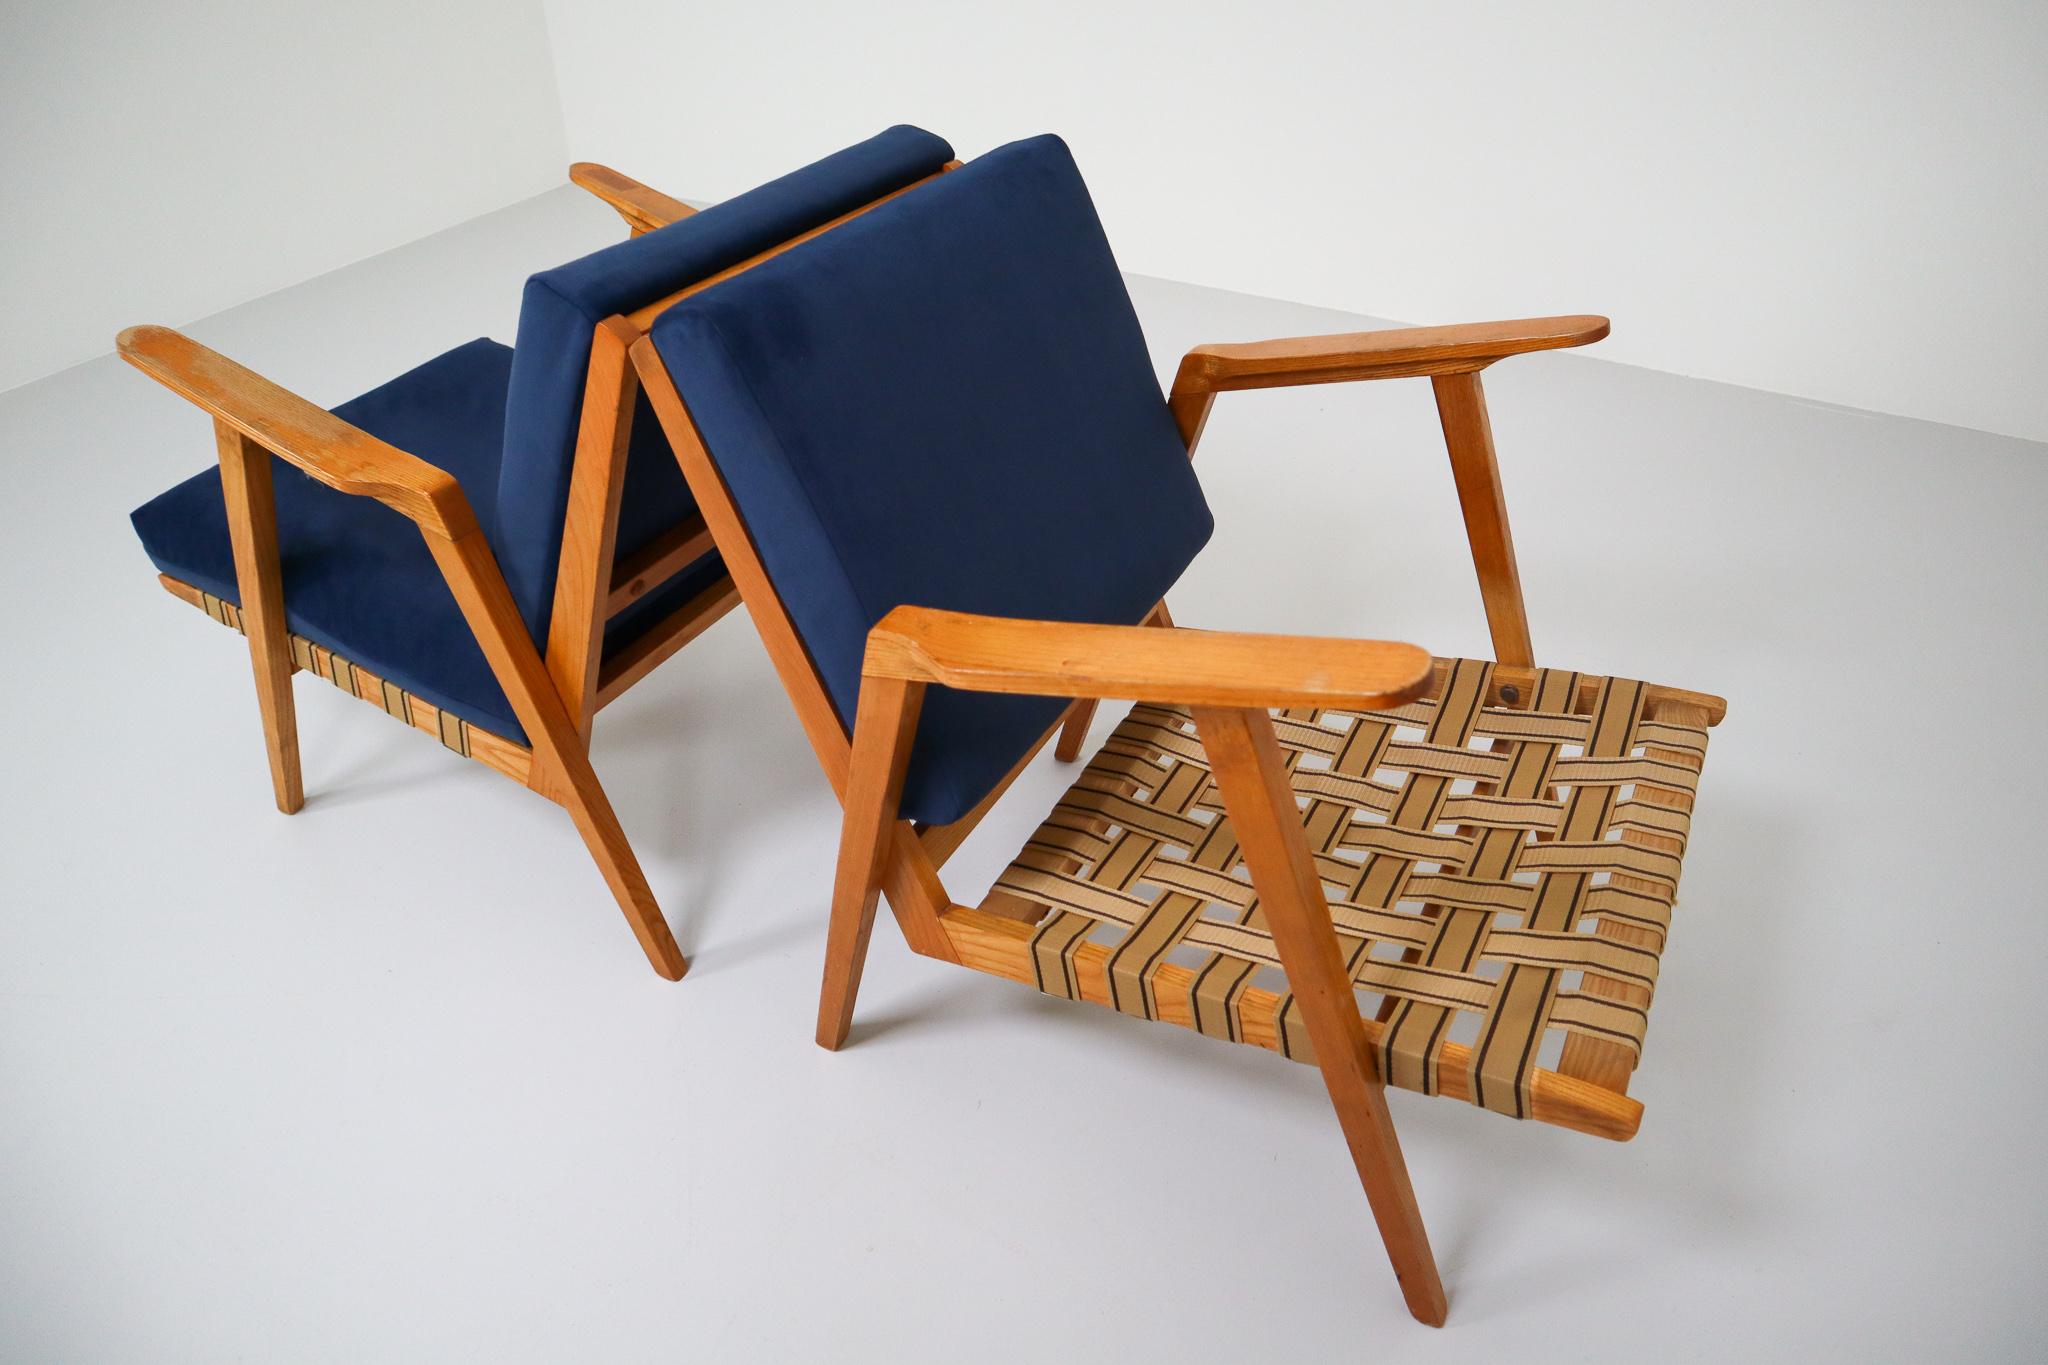 20th Century Midcentury Reupholstered Lounge Chairs in Blue Velvet, Czech Republic, 1960s